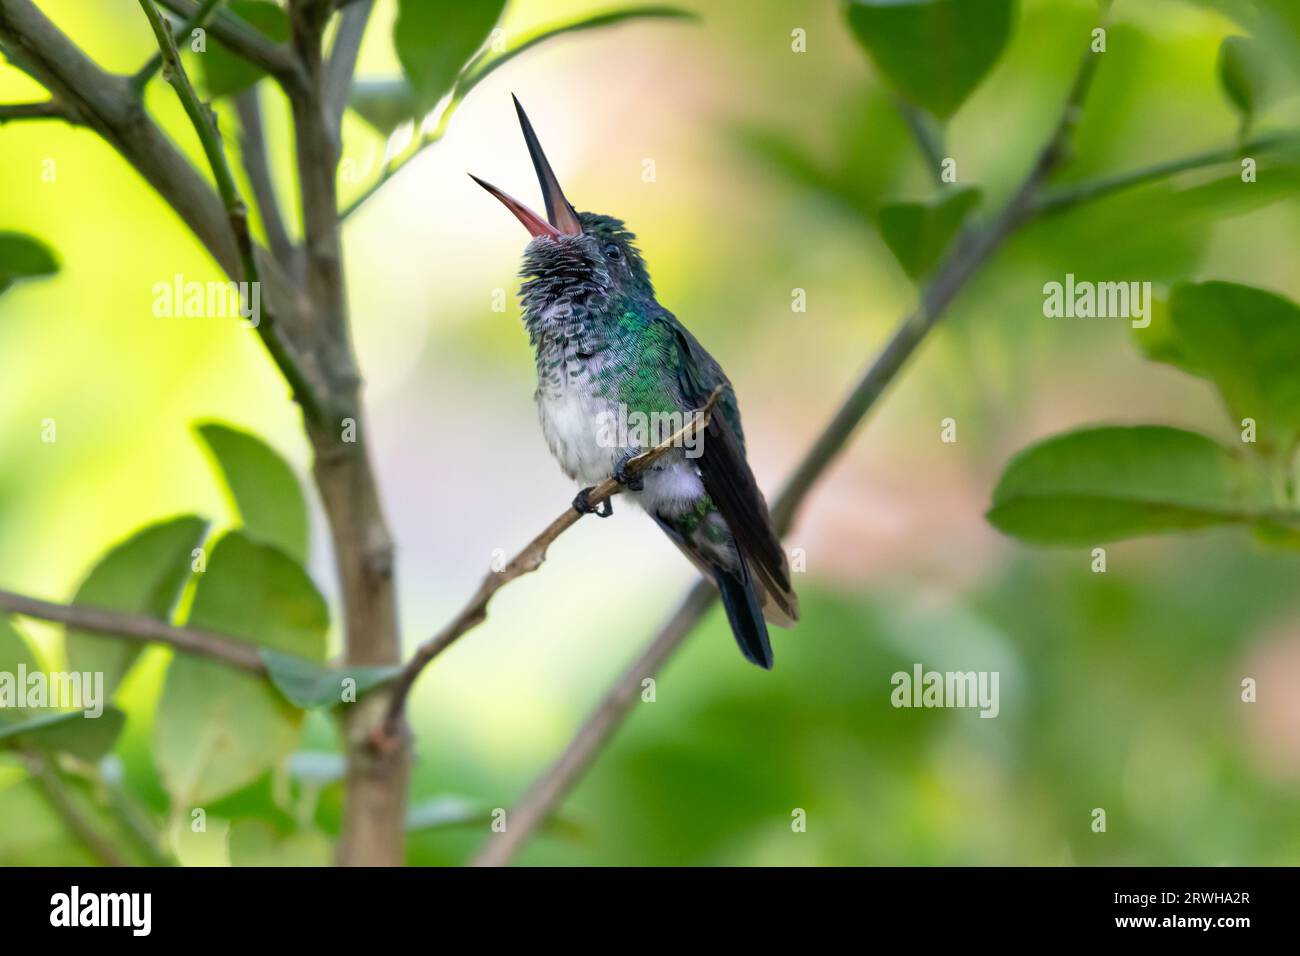 Blue-chinned Sapphire hummingbird, chlorestes notata, with her beak open chirping a song with soft pastel background Stock Photo